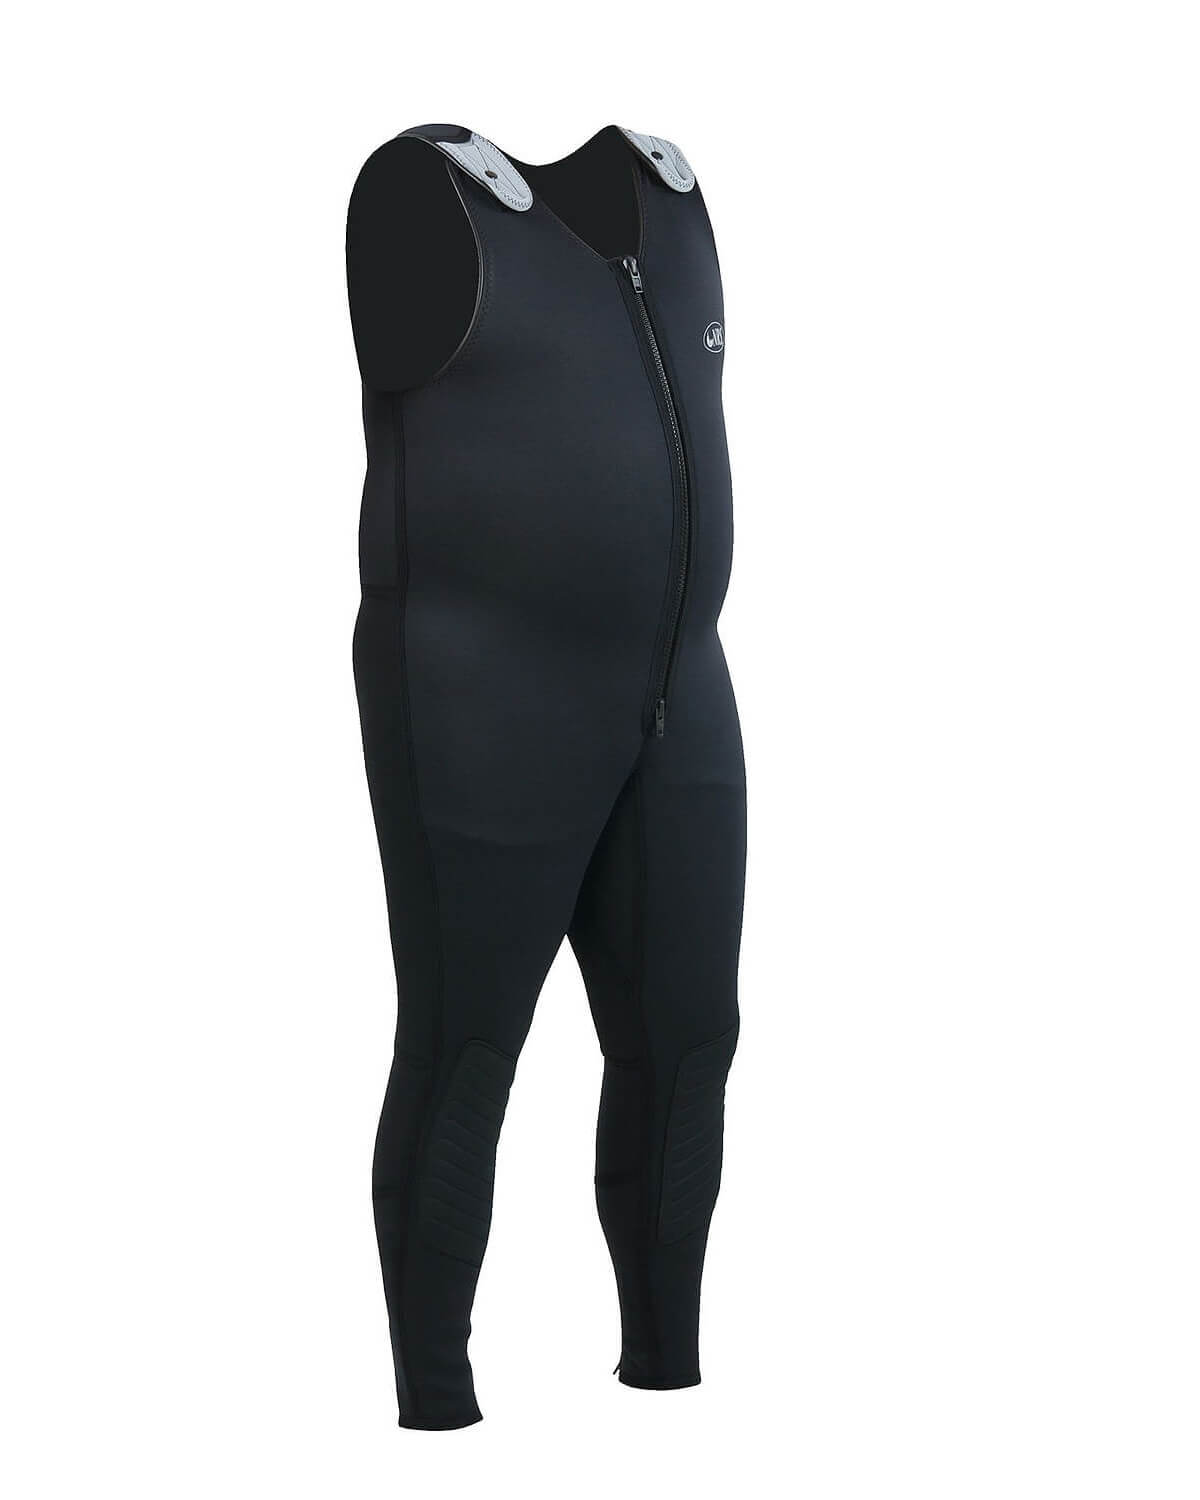 3mm Men's NRS Grizzly Long John Wetsuit